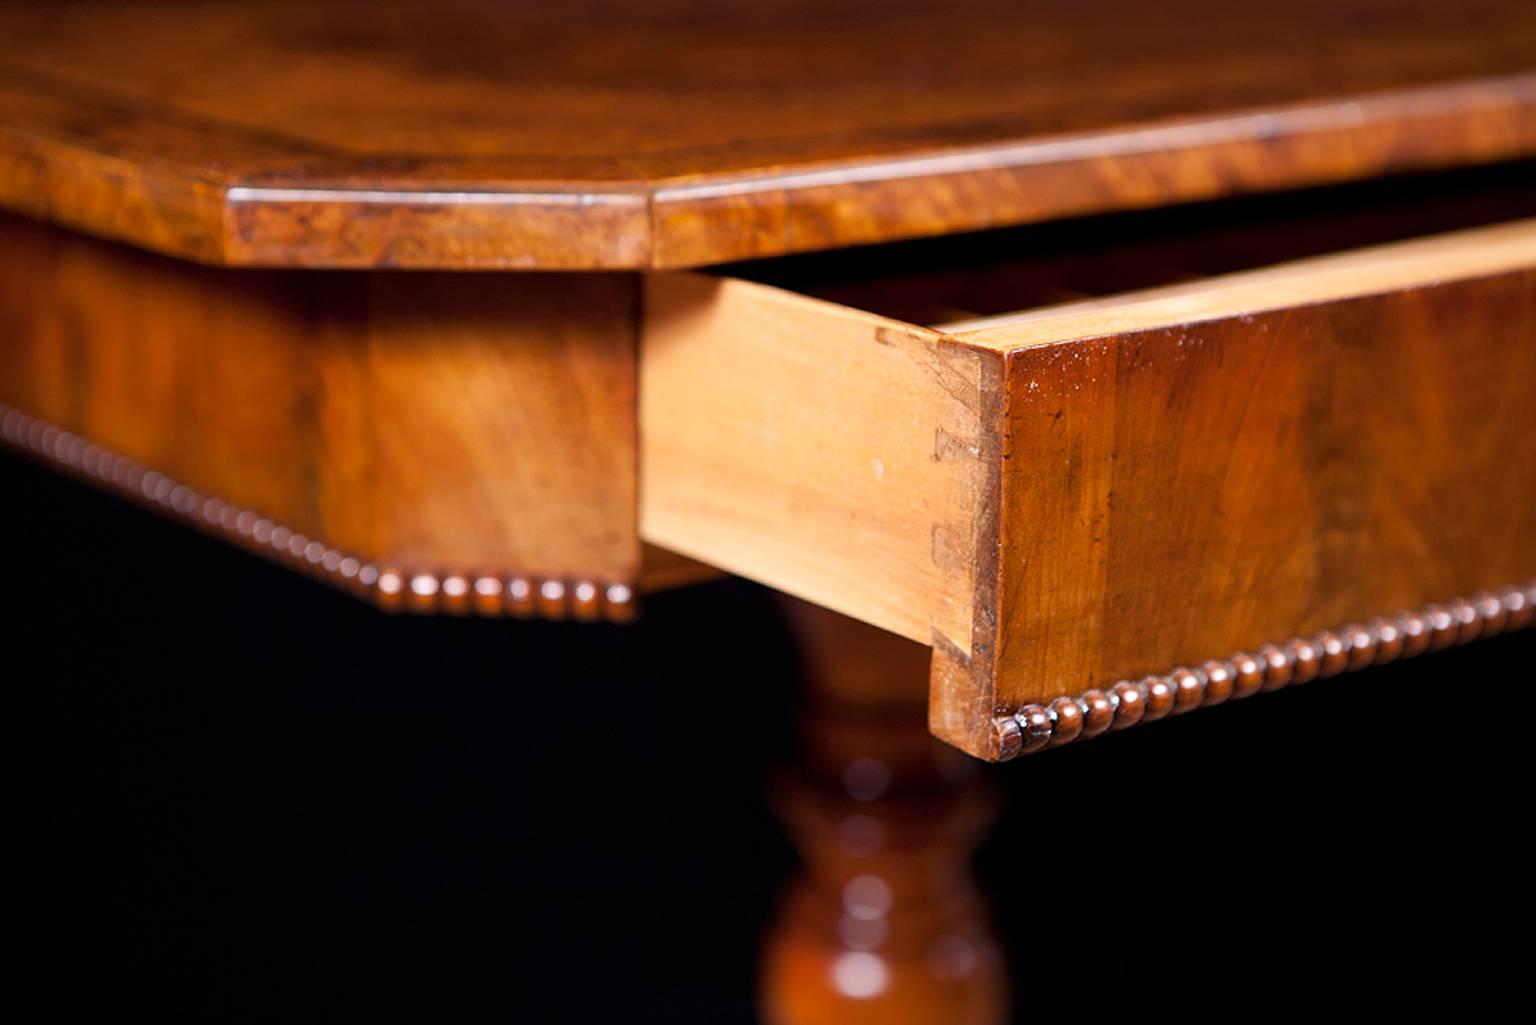 Hand-Carved 19th Century English Side Table in Walnut and Burl Walnut on Center Pedestal